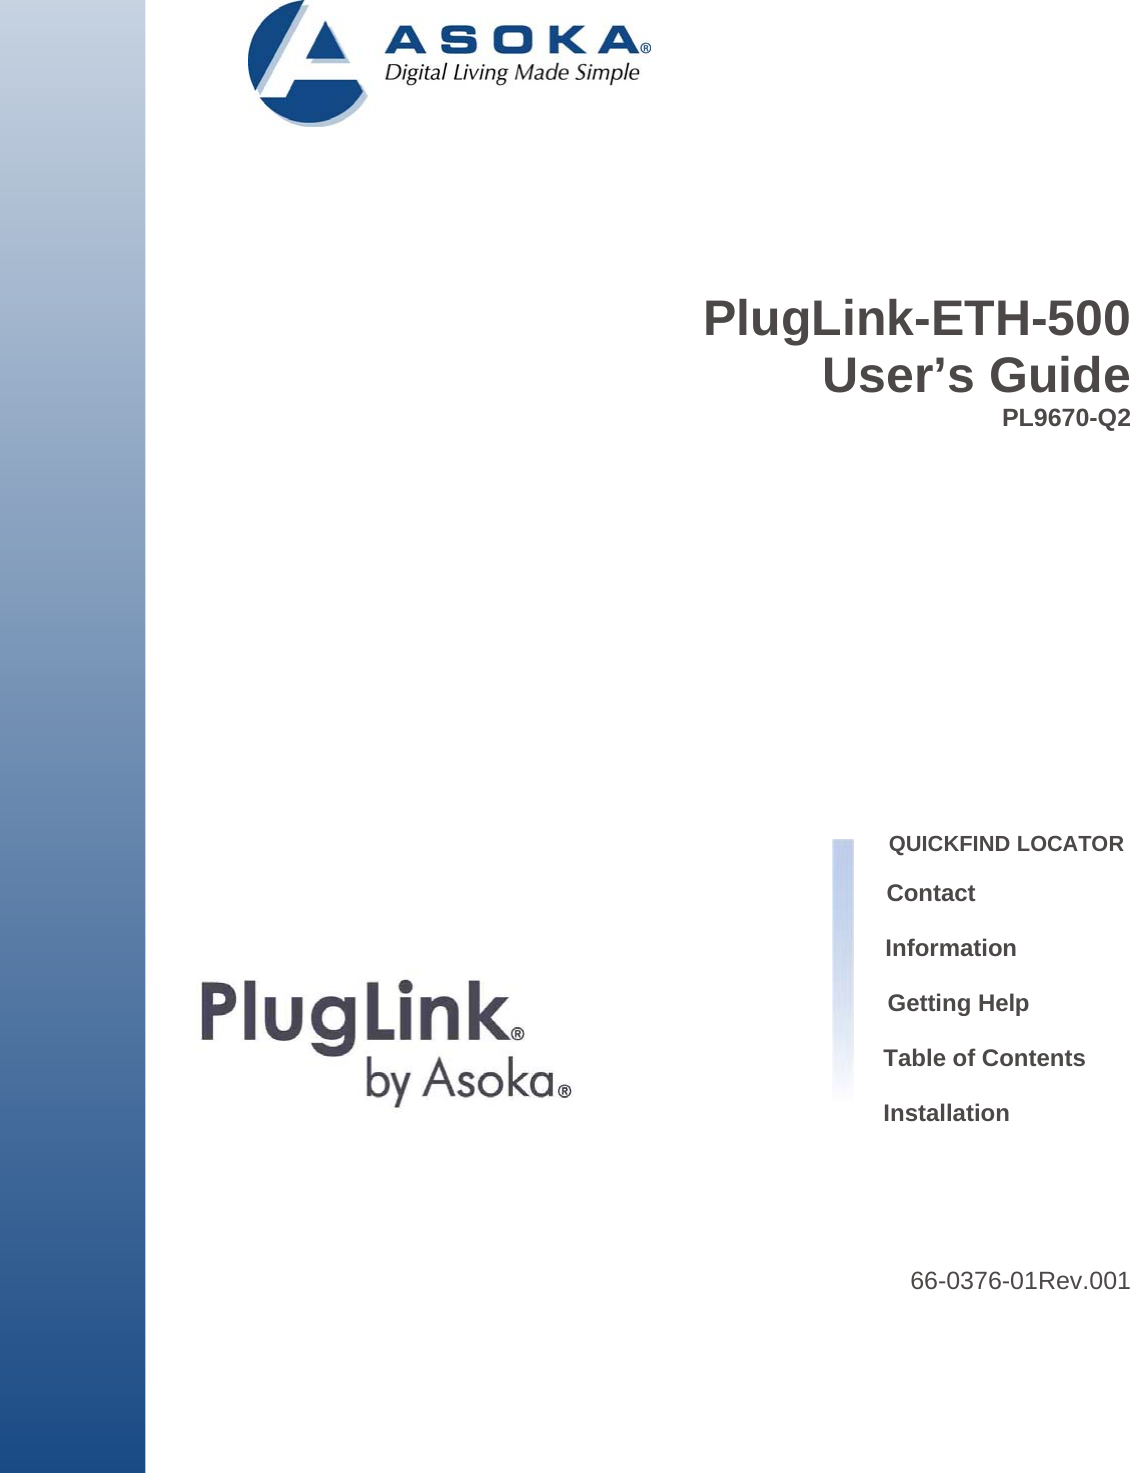               PlugLink-ETH-500 User’s Guide PL9670-Q2                  QUICKFIND LOCATOR  Contact  Information                                                                                                             Getting Help   Table of Contents   Installation        66-0376-01Rev.001